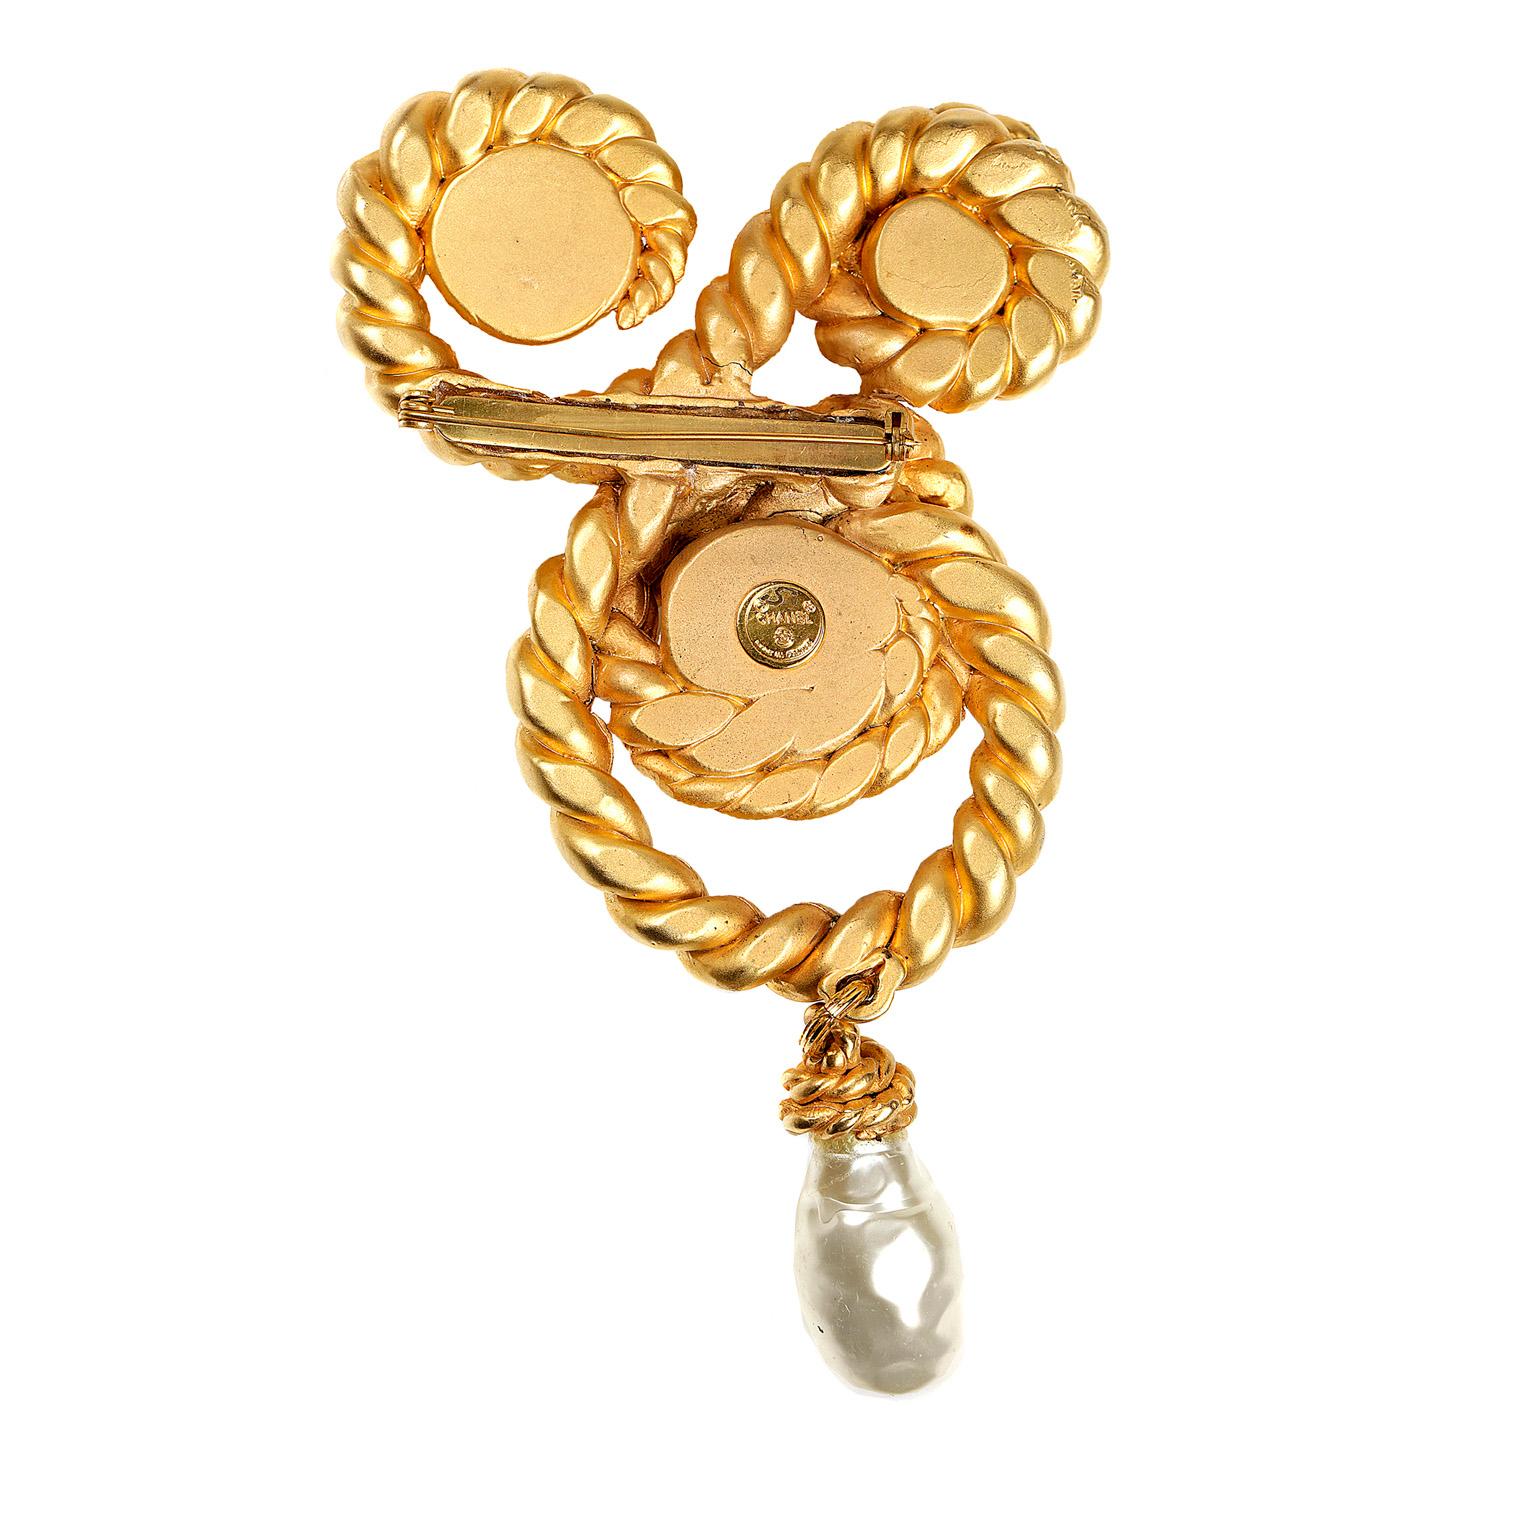 This authentic Chanel Gold Swirling Rope and Pearl Pin is in mint vintage condition from the 1970’s.  Three faux pearls are surrounded by gold tone swirling rope design.  A single teardrop pearl dangles from the bottom. 

4” at the widest point